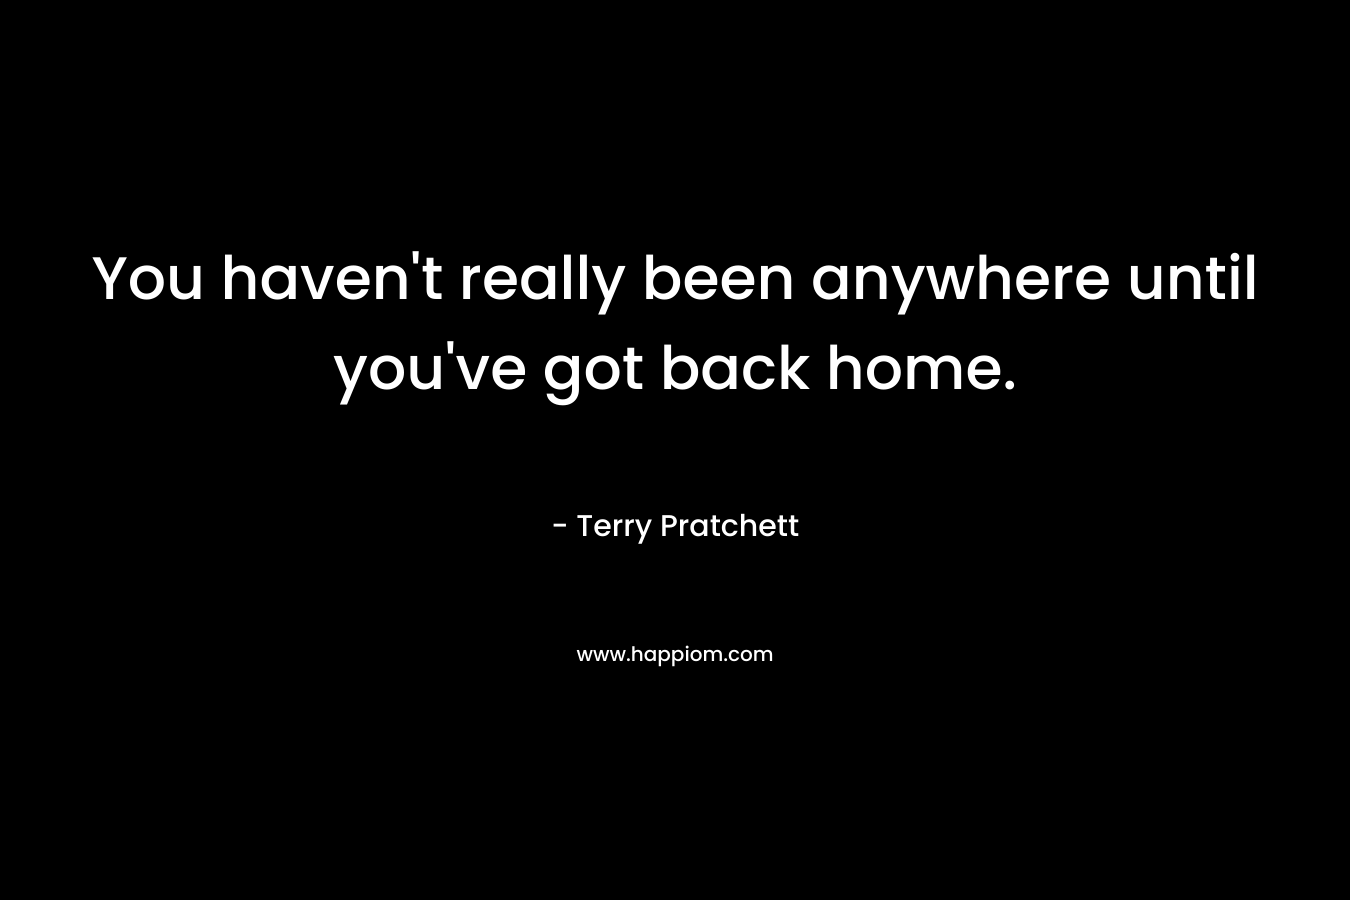 You haven't really been anywhere until you've got back home.